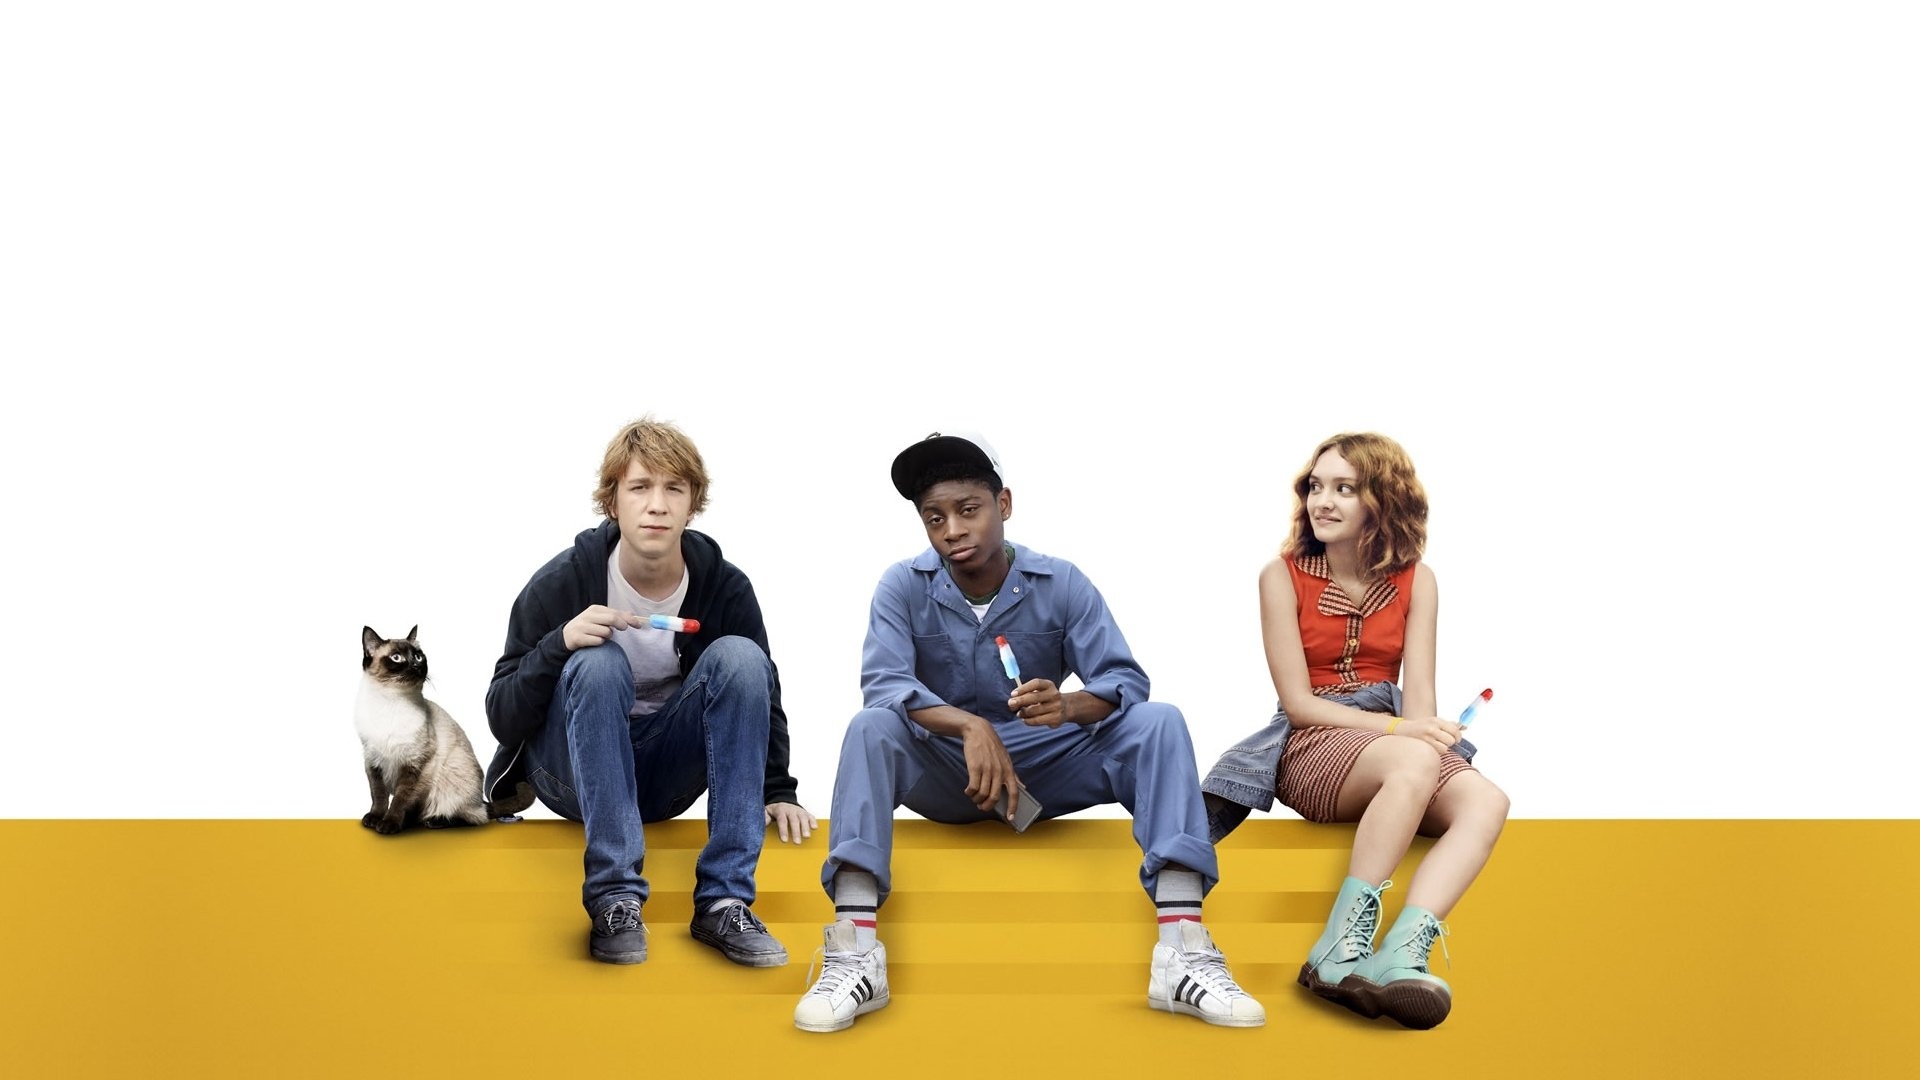 Me and Earl and the Dying Girl, HD wallpaper, Background image, 1920x1080 Full HD Desktop